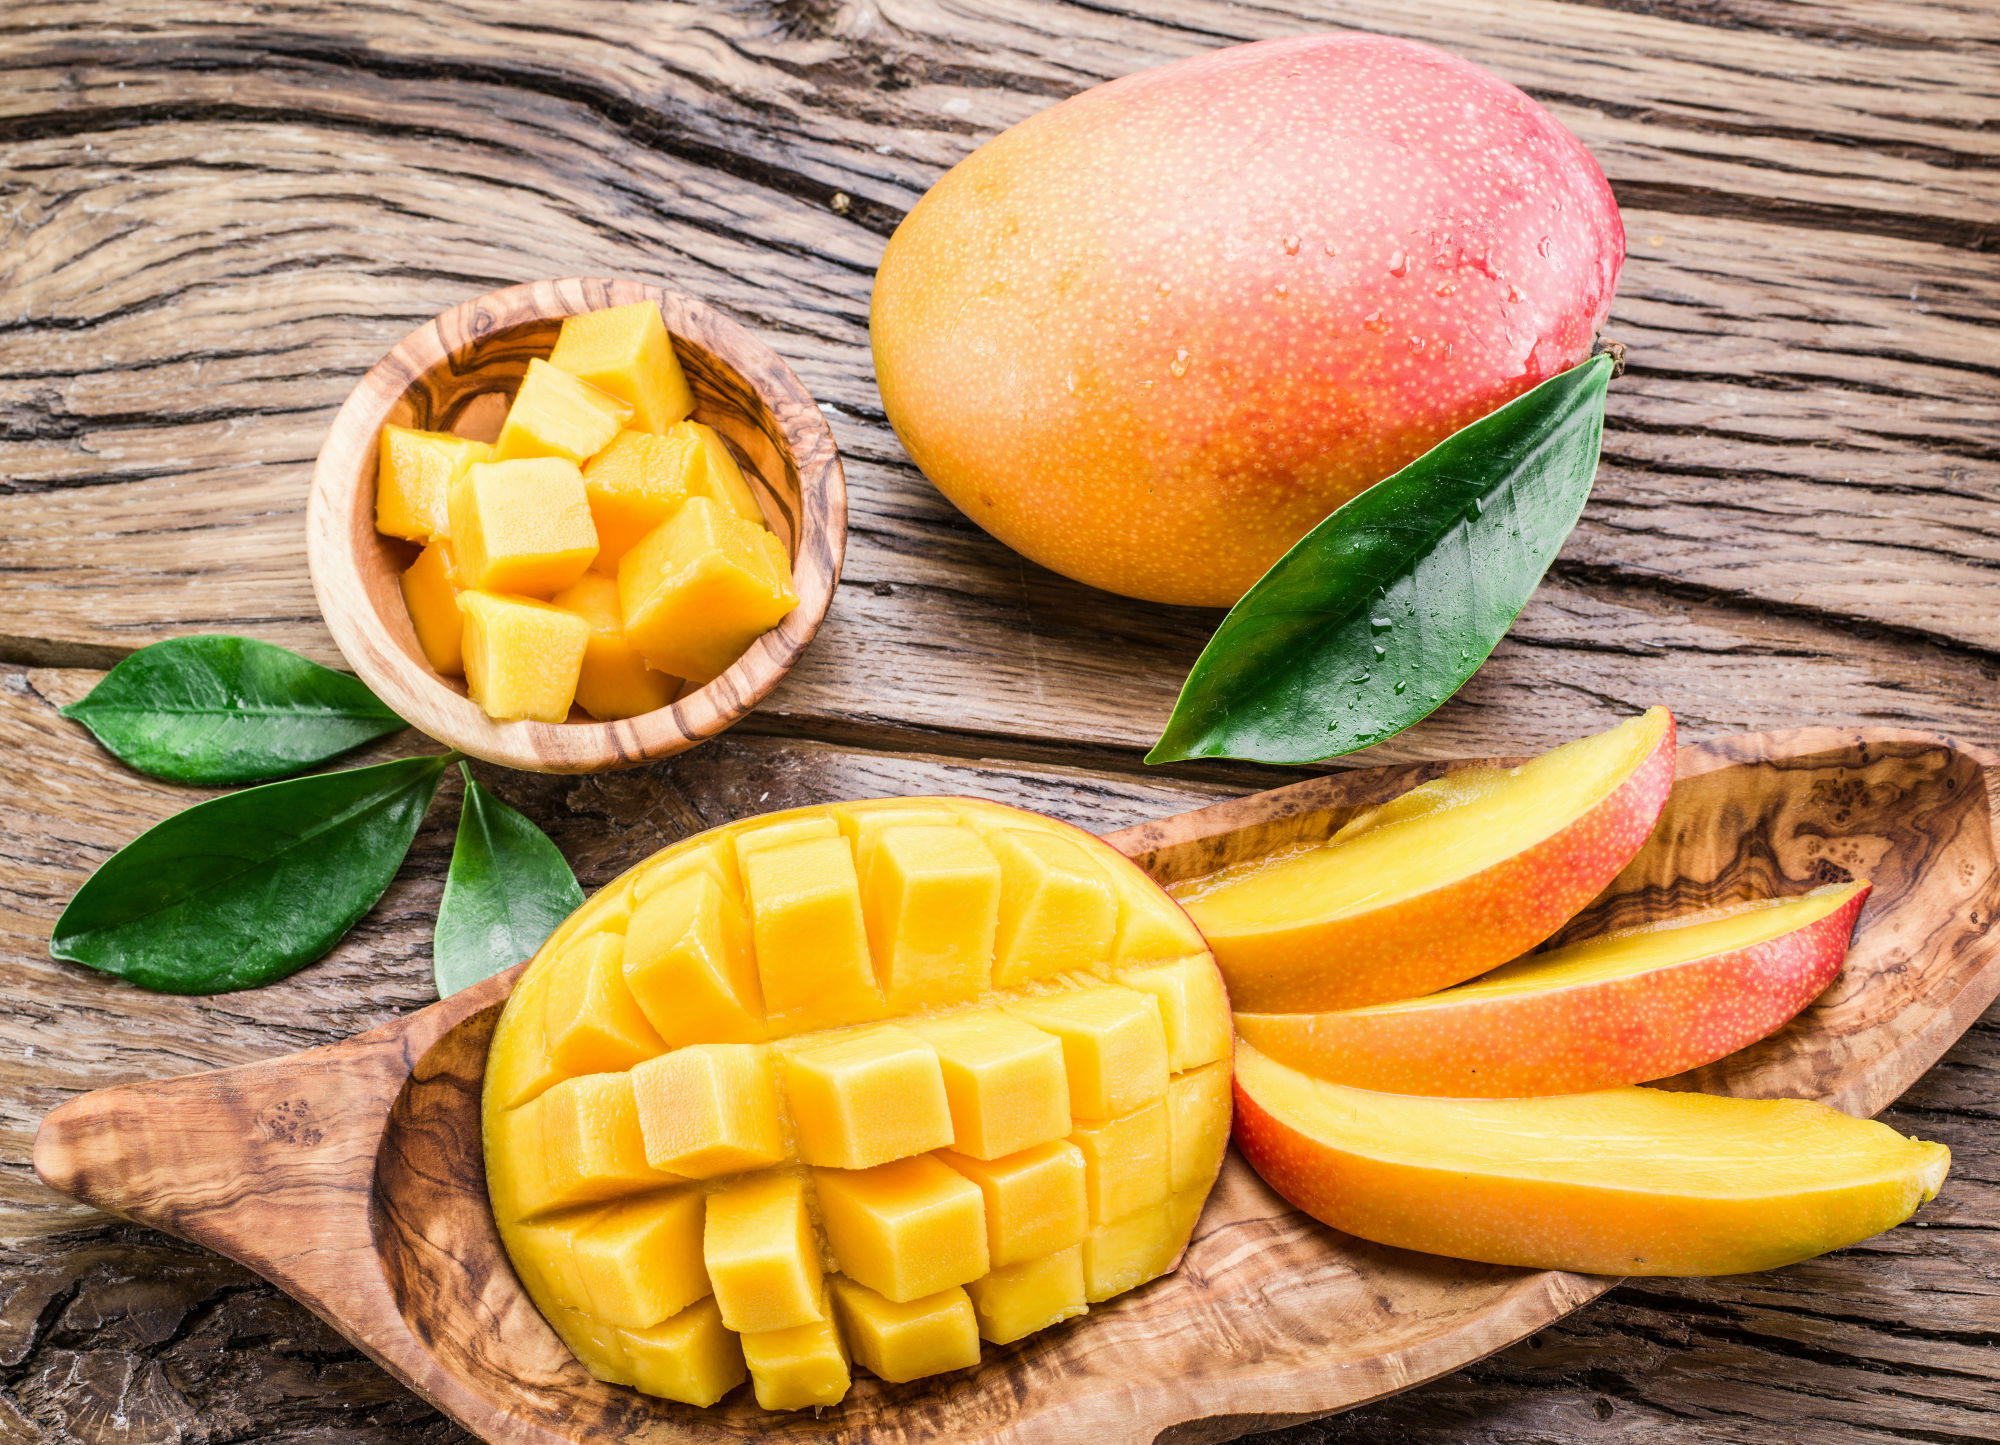 Organic Mango: Tropical Delight Without the Pesticide Residue Risk